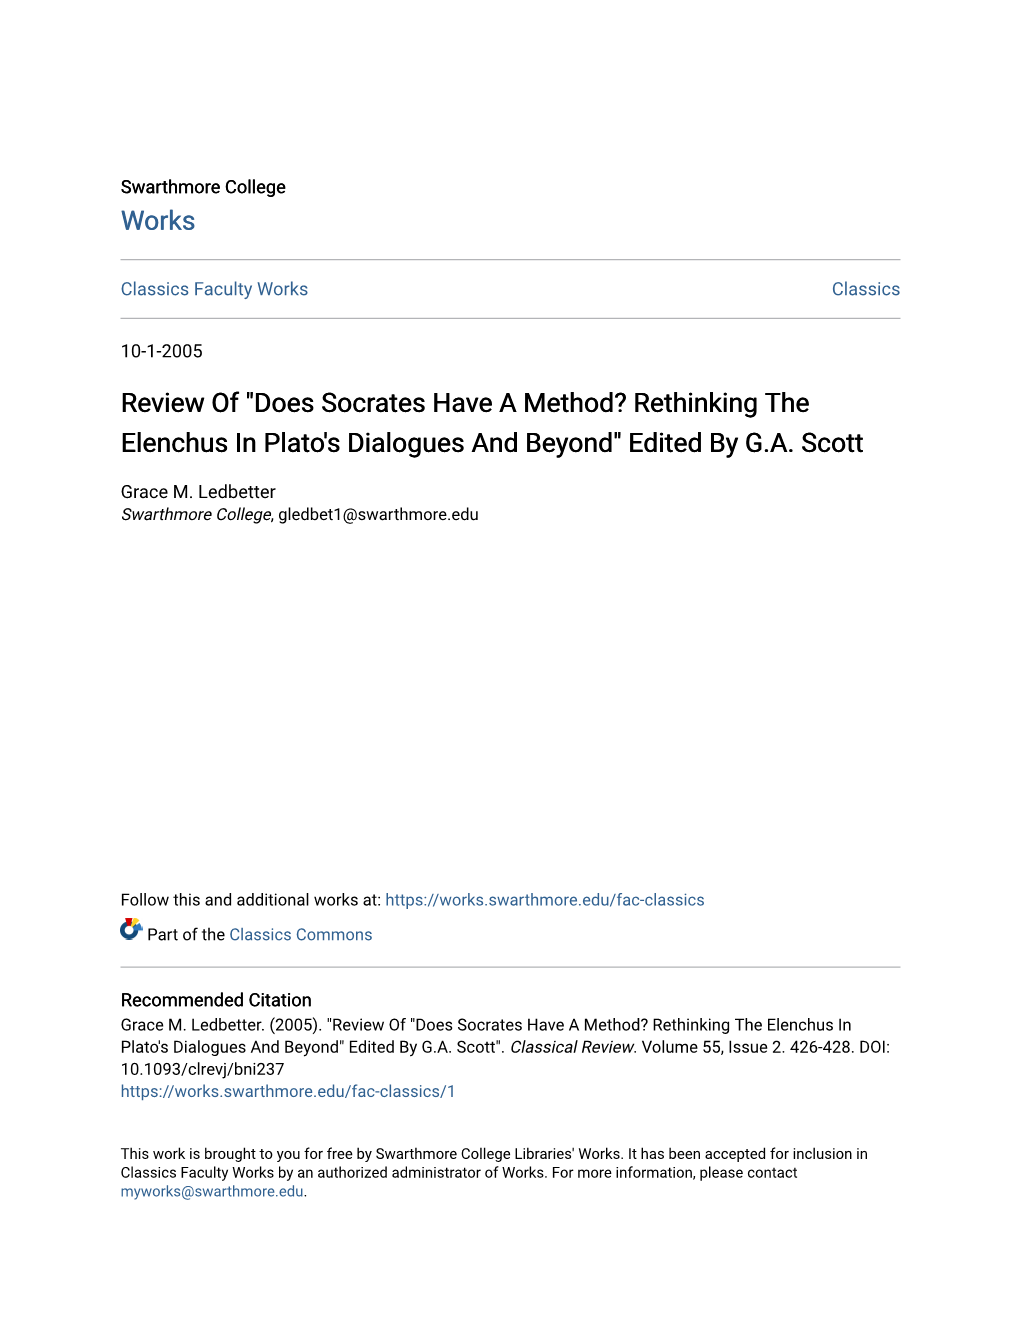 Review Of" Does Socrates Have a Method? Rethinking the Elenchus in Plato's Dialogues and Beyond" Edited by GA Scott